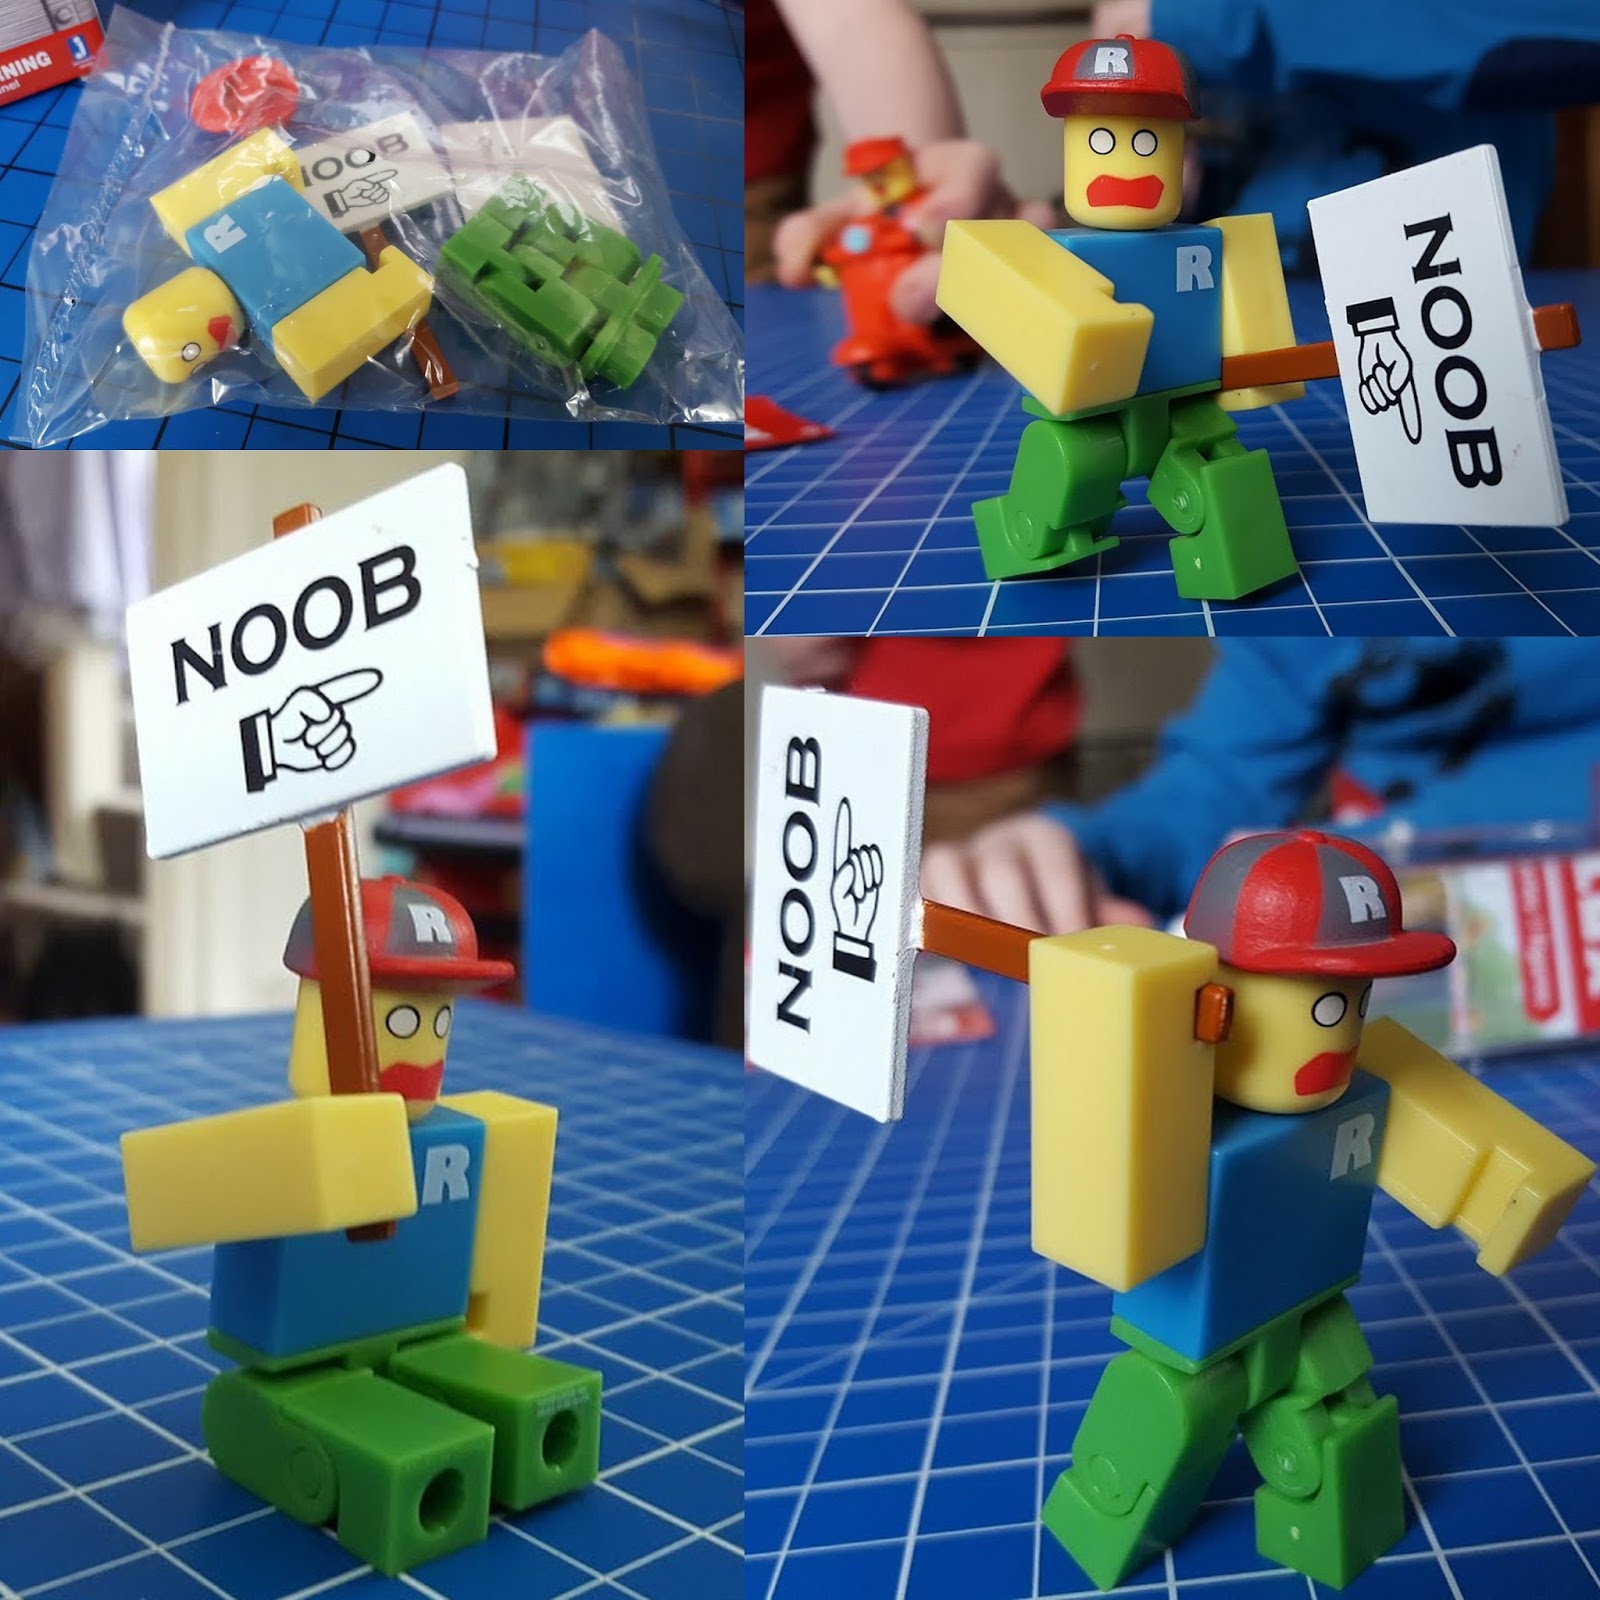 The Brick Castle Roblox Toys Series 1 From Jazwares Review Age 6 - roblox toys noob